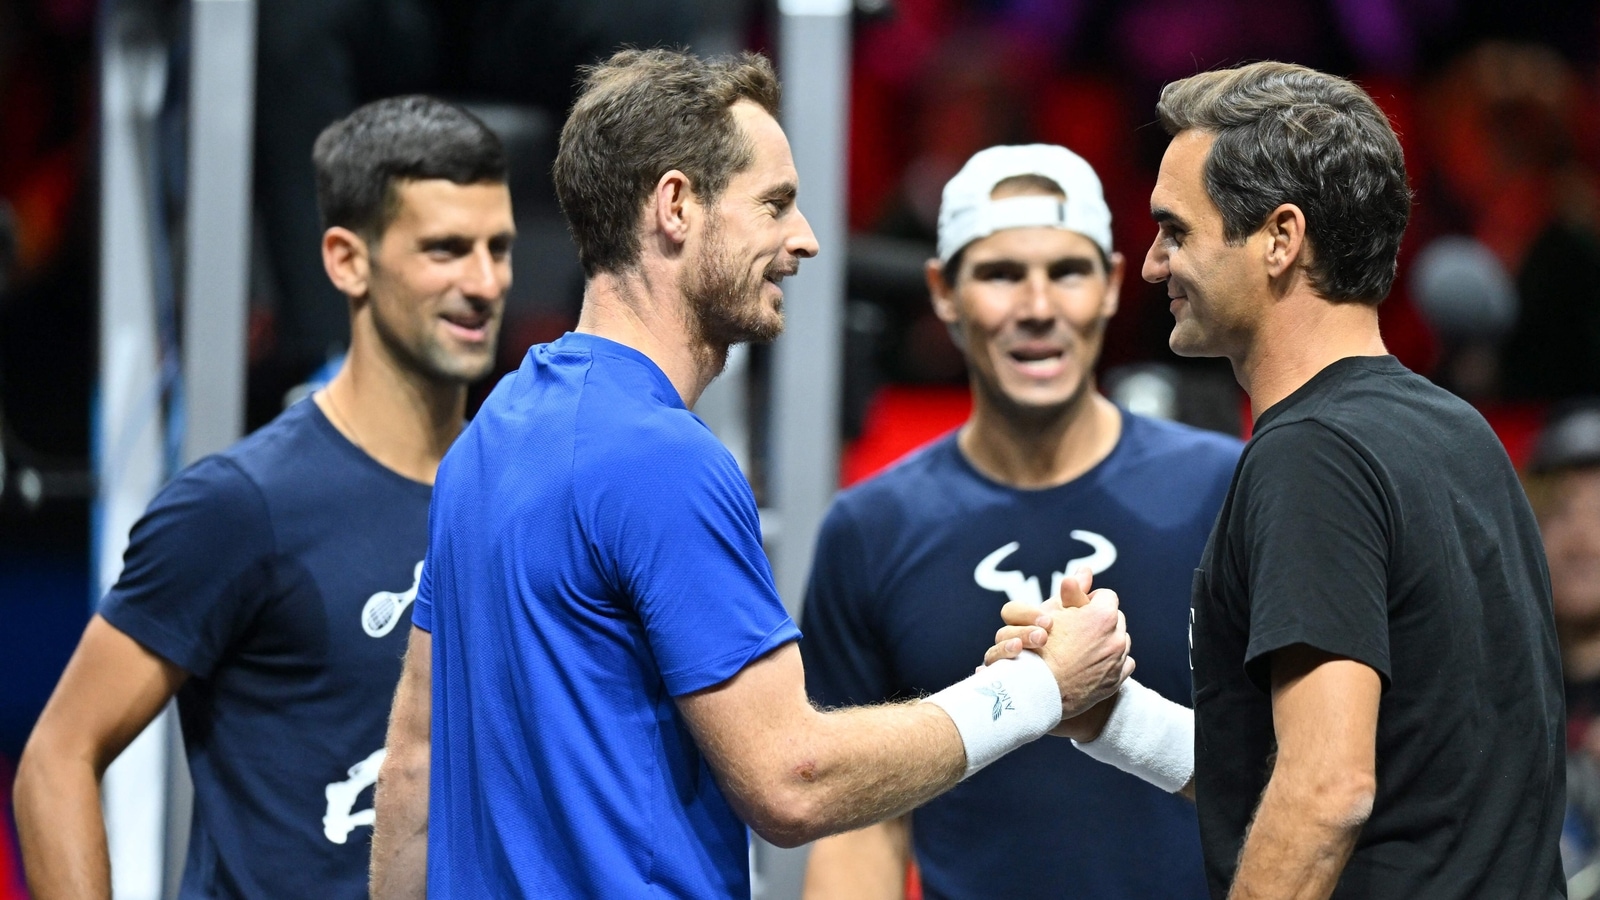 Watch: ‘Big Four’ unites in epic Team Europe practice session as Federer and Nadal take on Murray and Djokovic